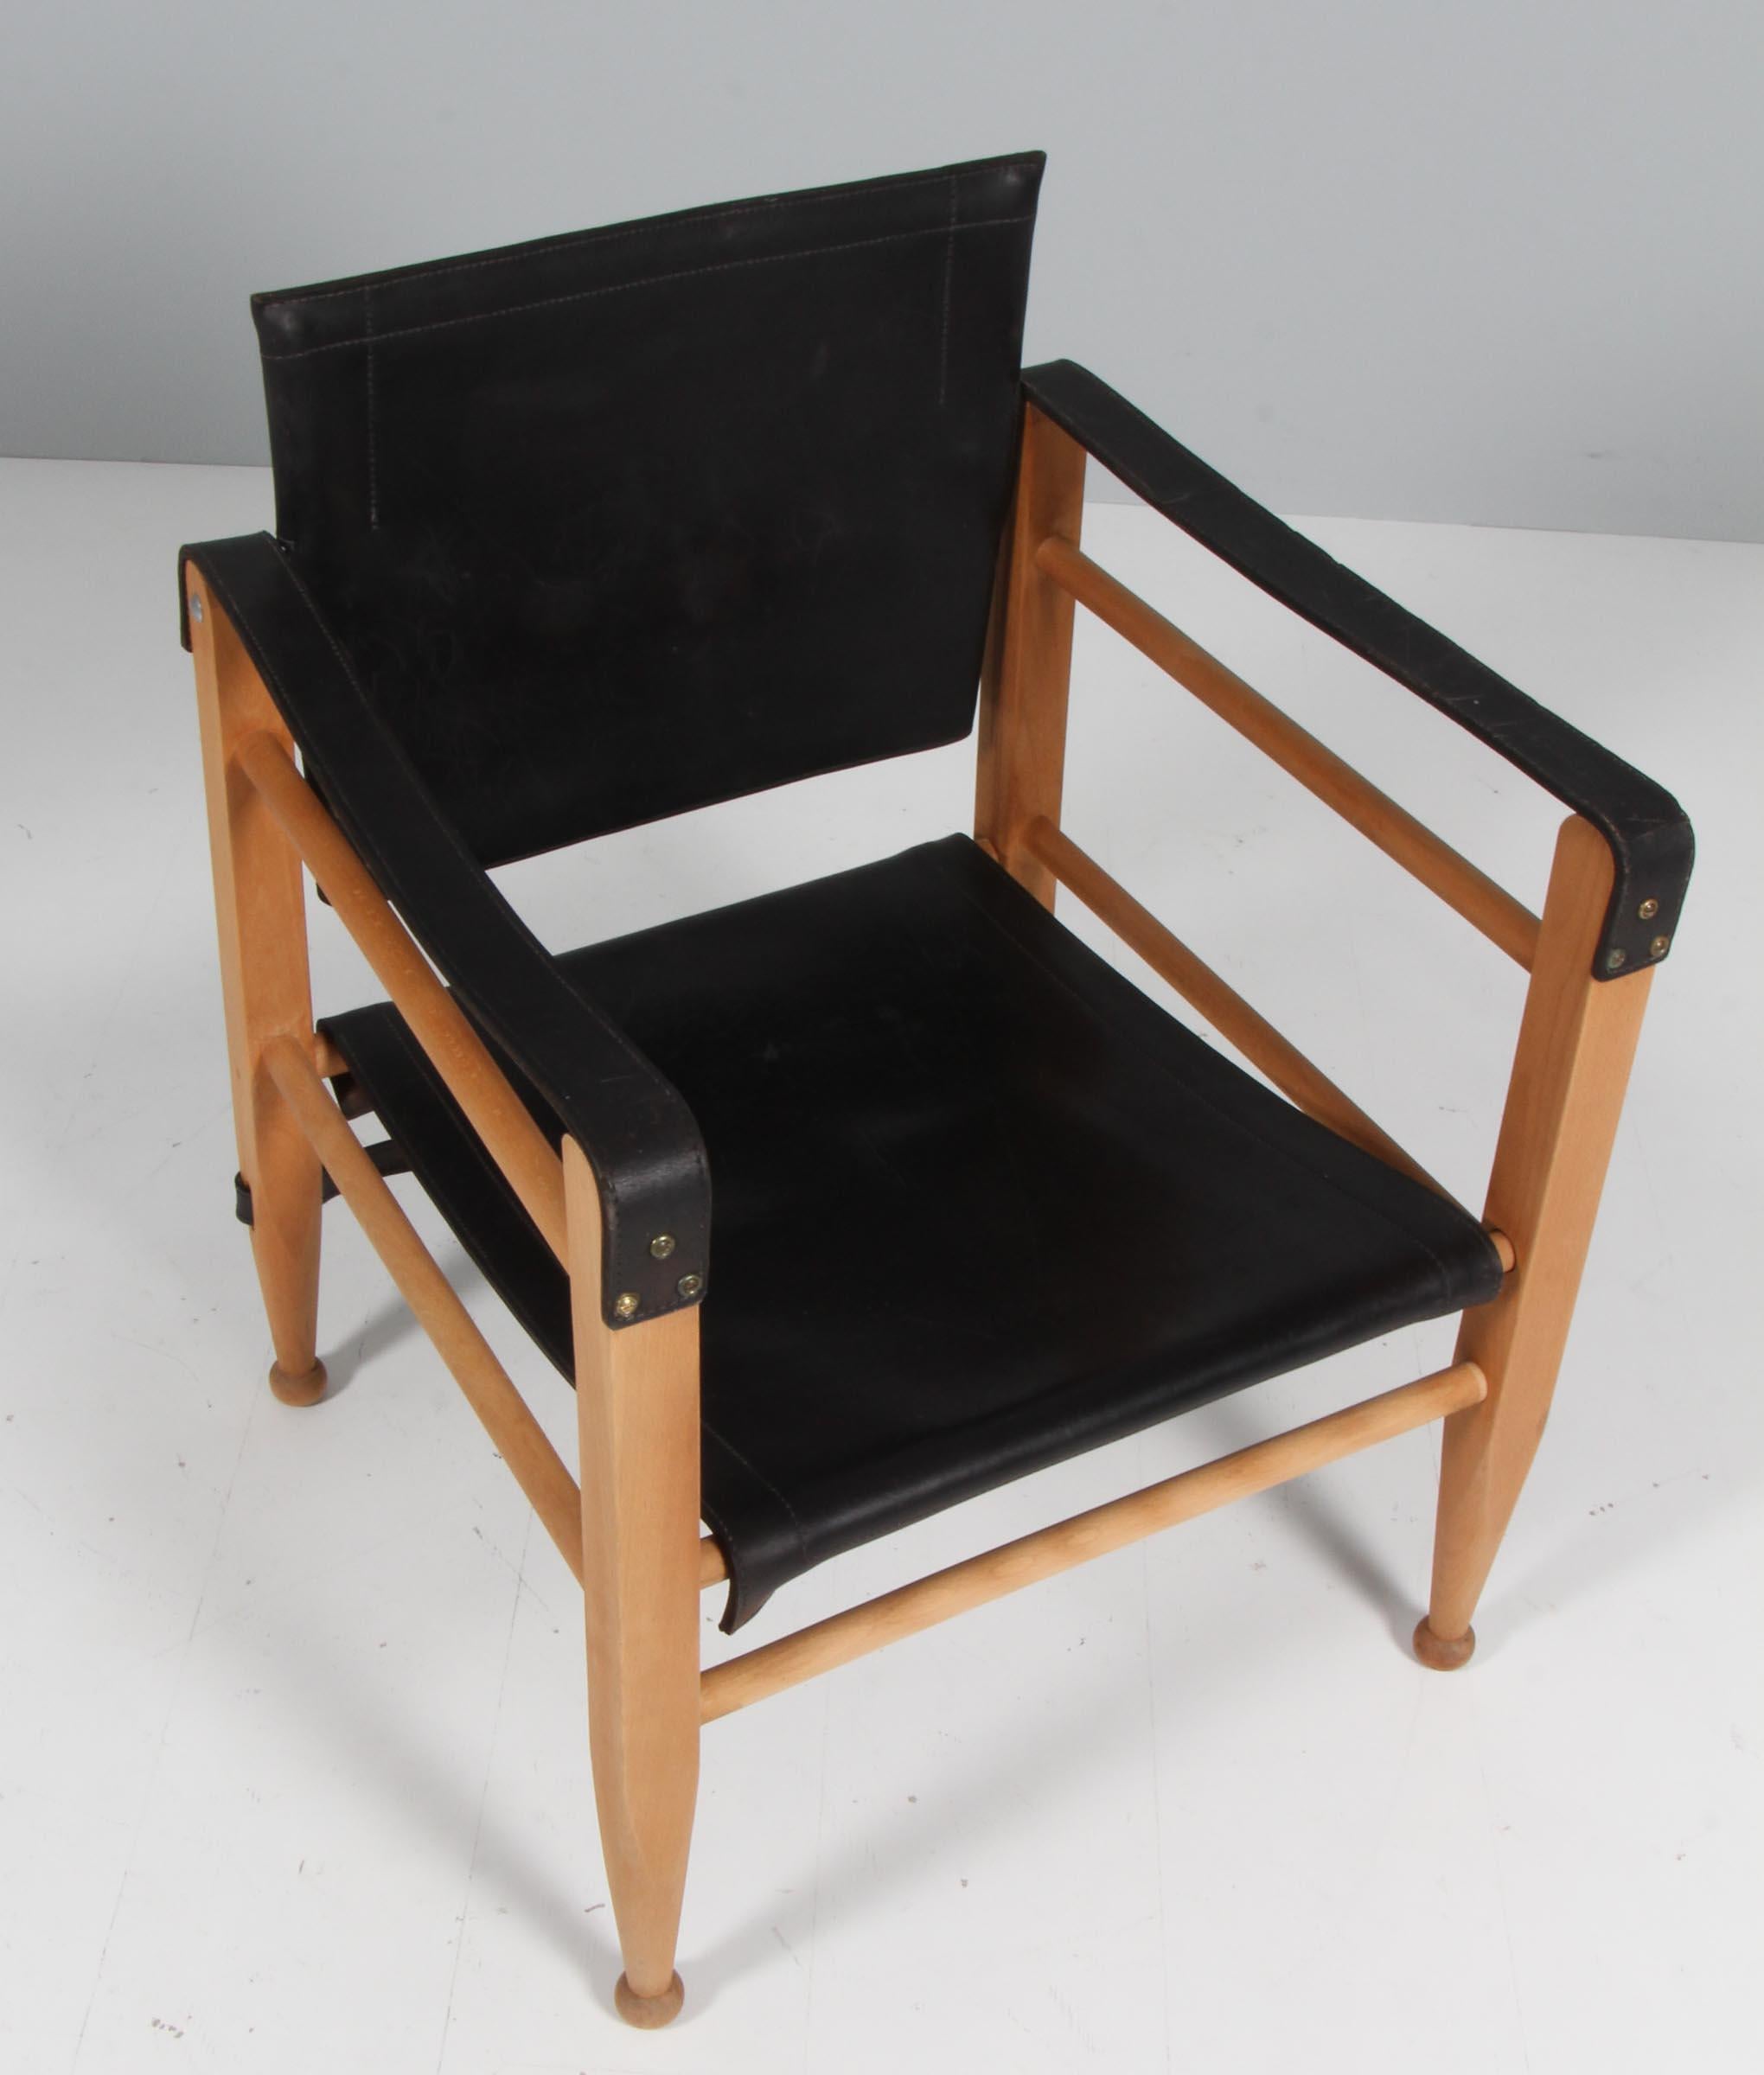 Aage Bruun & Son safari chair with frame of beech. Seat, back and armrests of patinated black saddle leather. 

Made in the 1960's by Aage Bruun & Son.